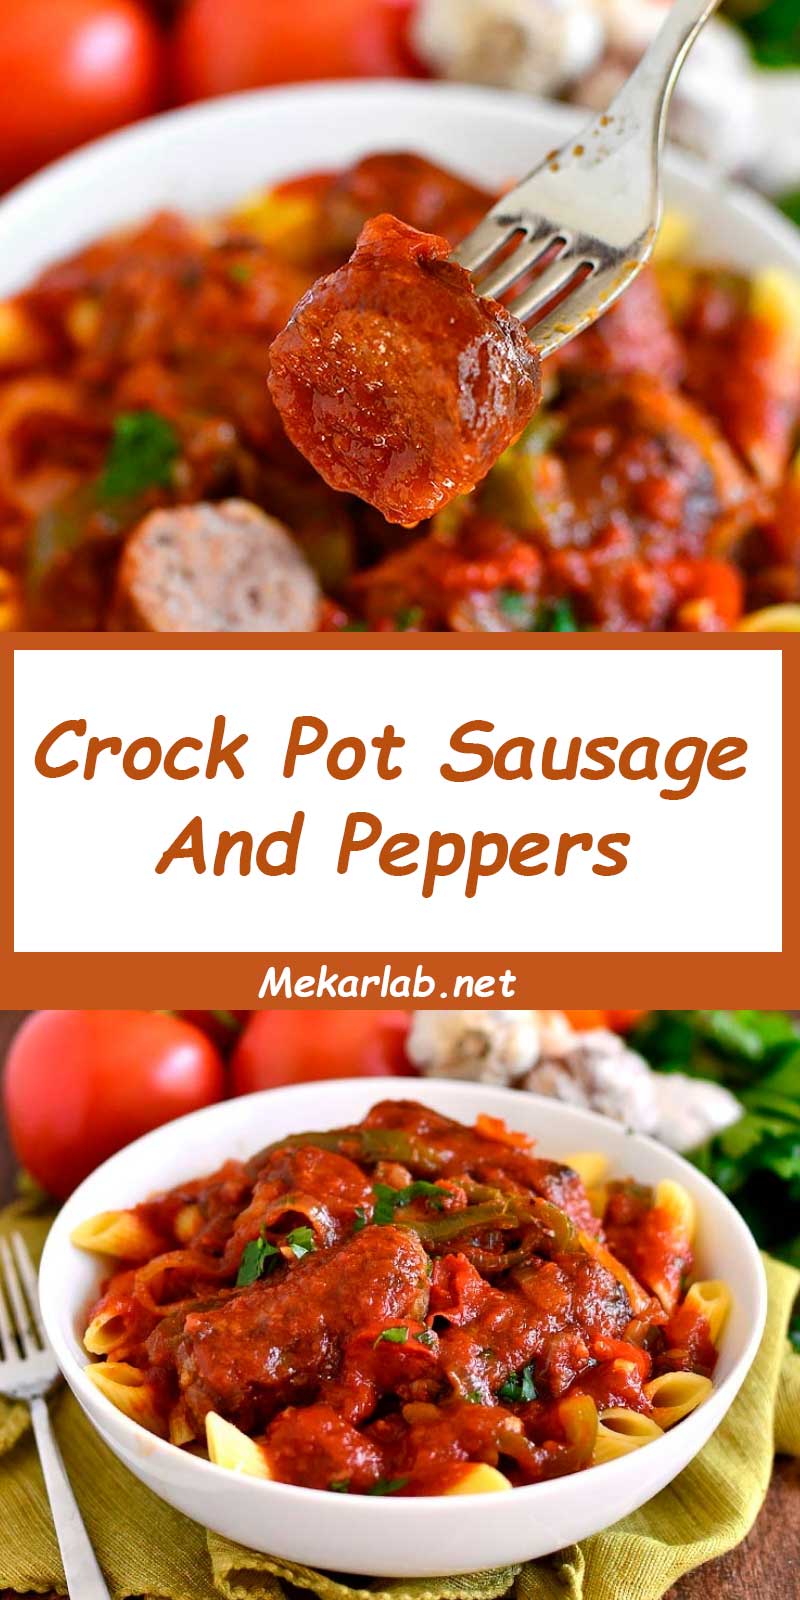 Crock Pot Sausage And Peppers